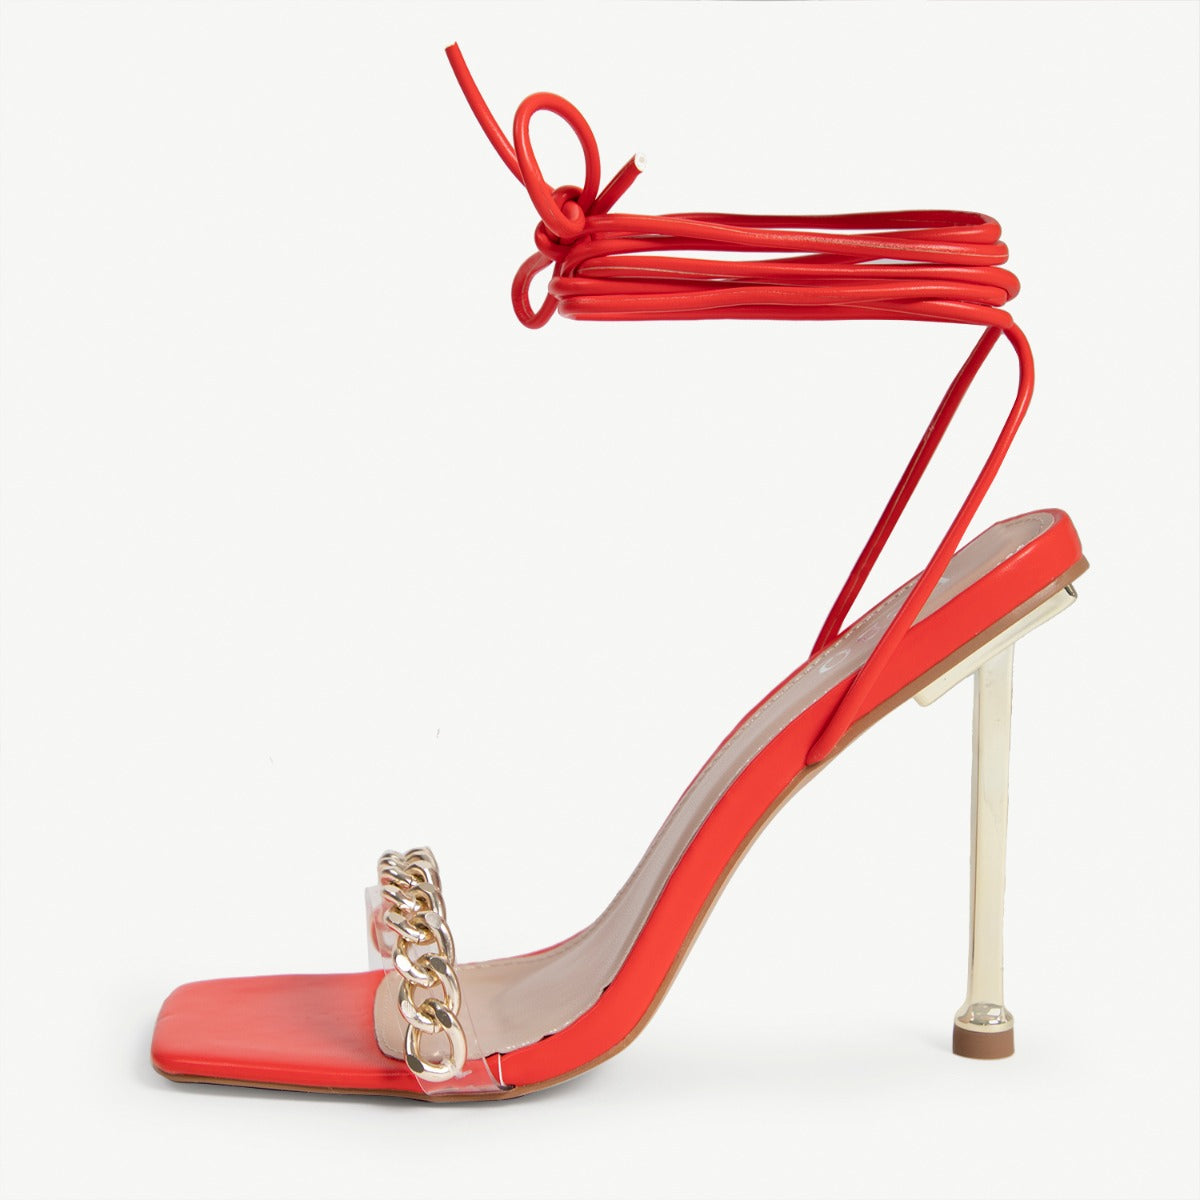 The Mia Faux Suede Lace Up Heel in Red • Impressions Online Boutique